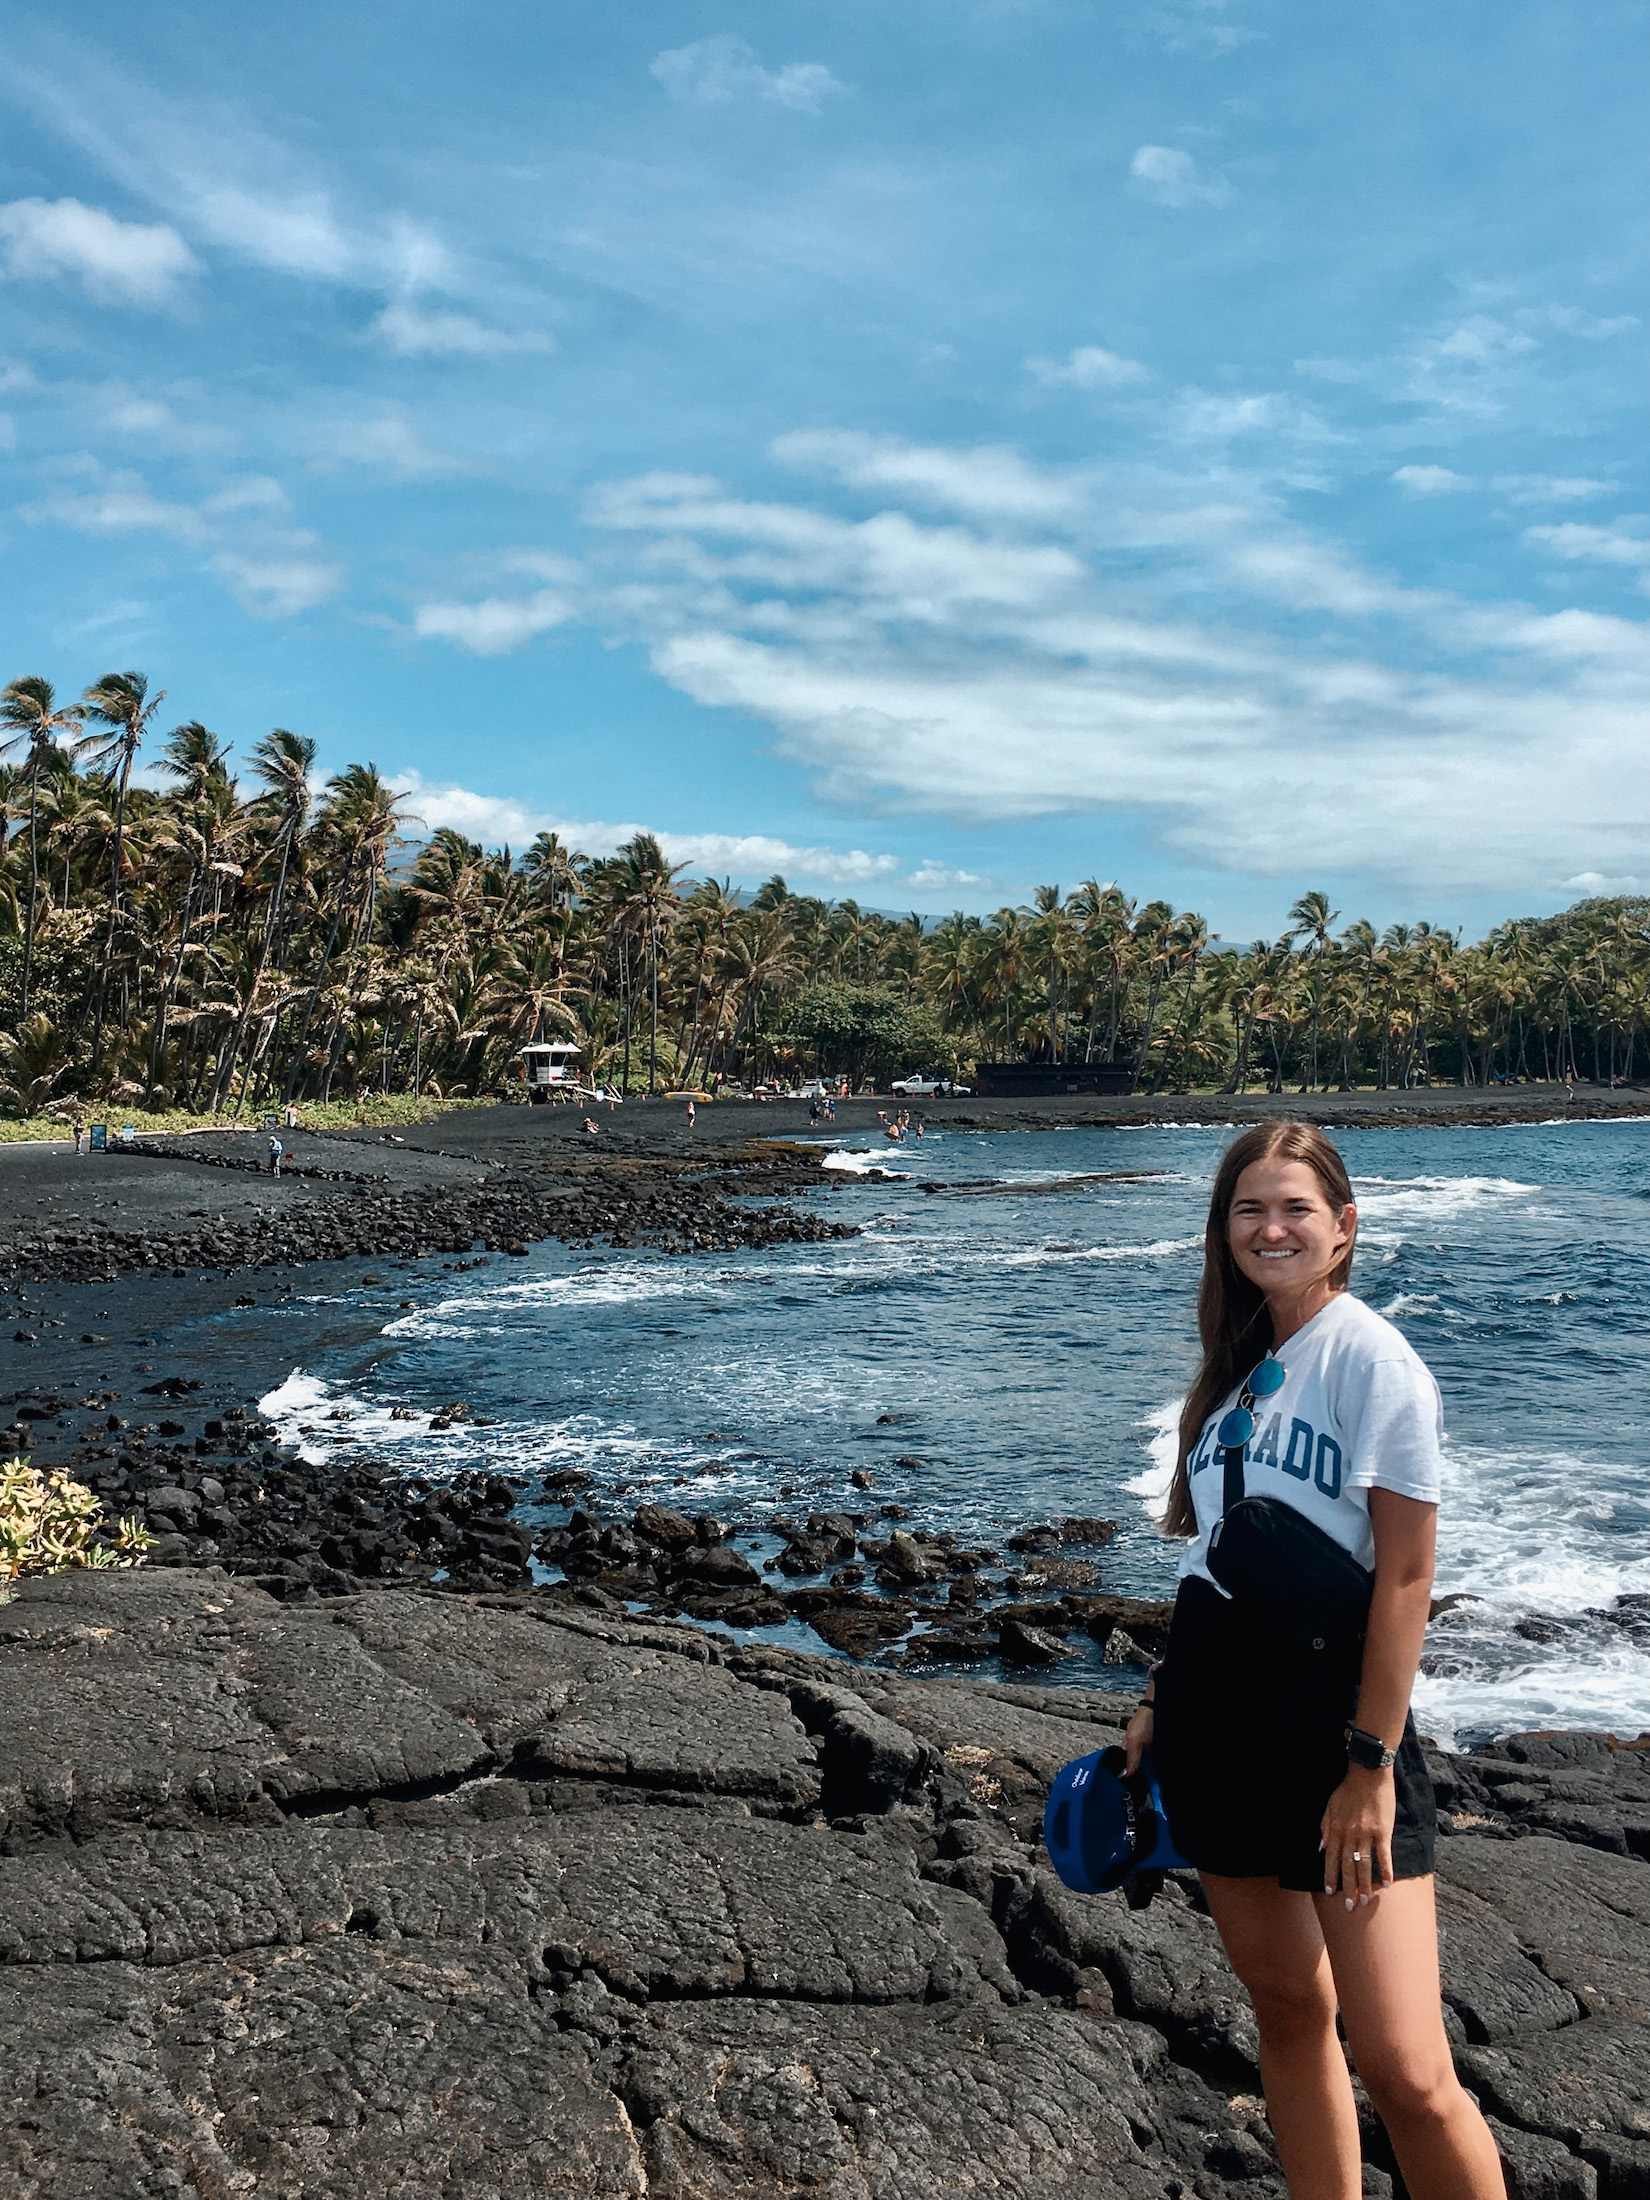 Niki stands in front of a black sand beach, Big Island, Hawaii, USA